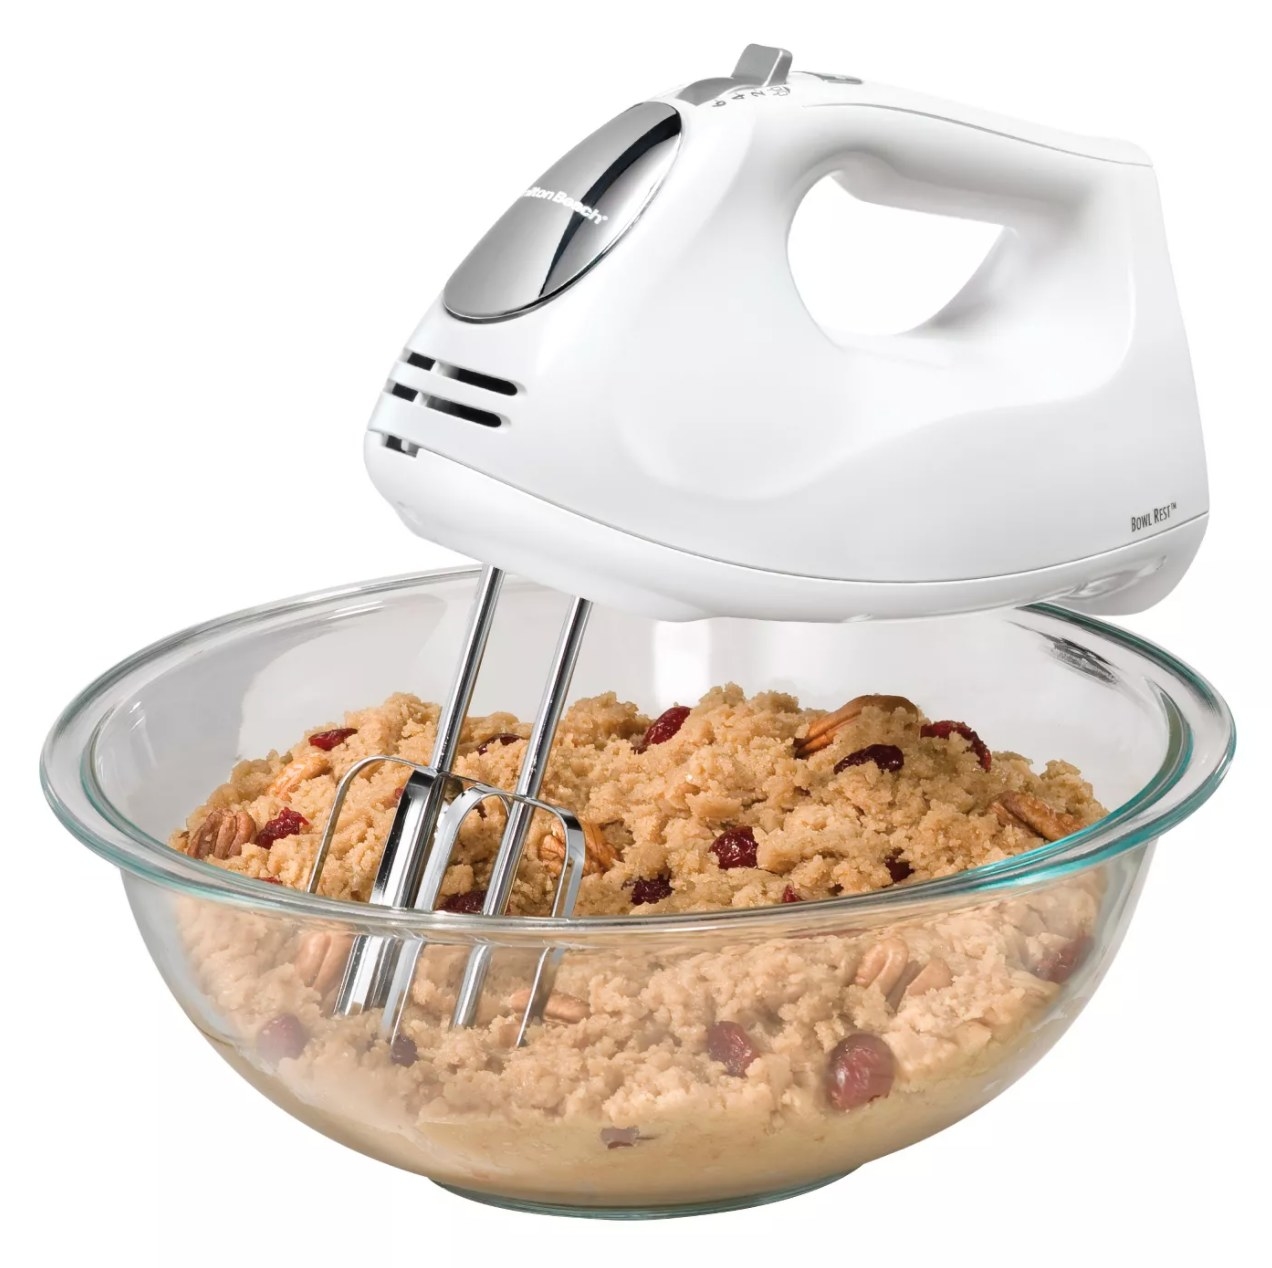 The hand mixer being used to make cookie dough